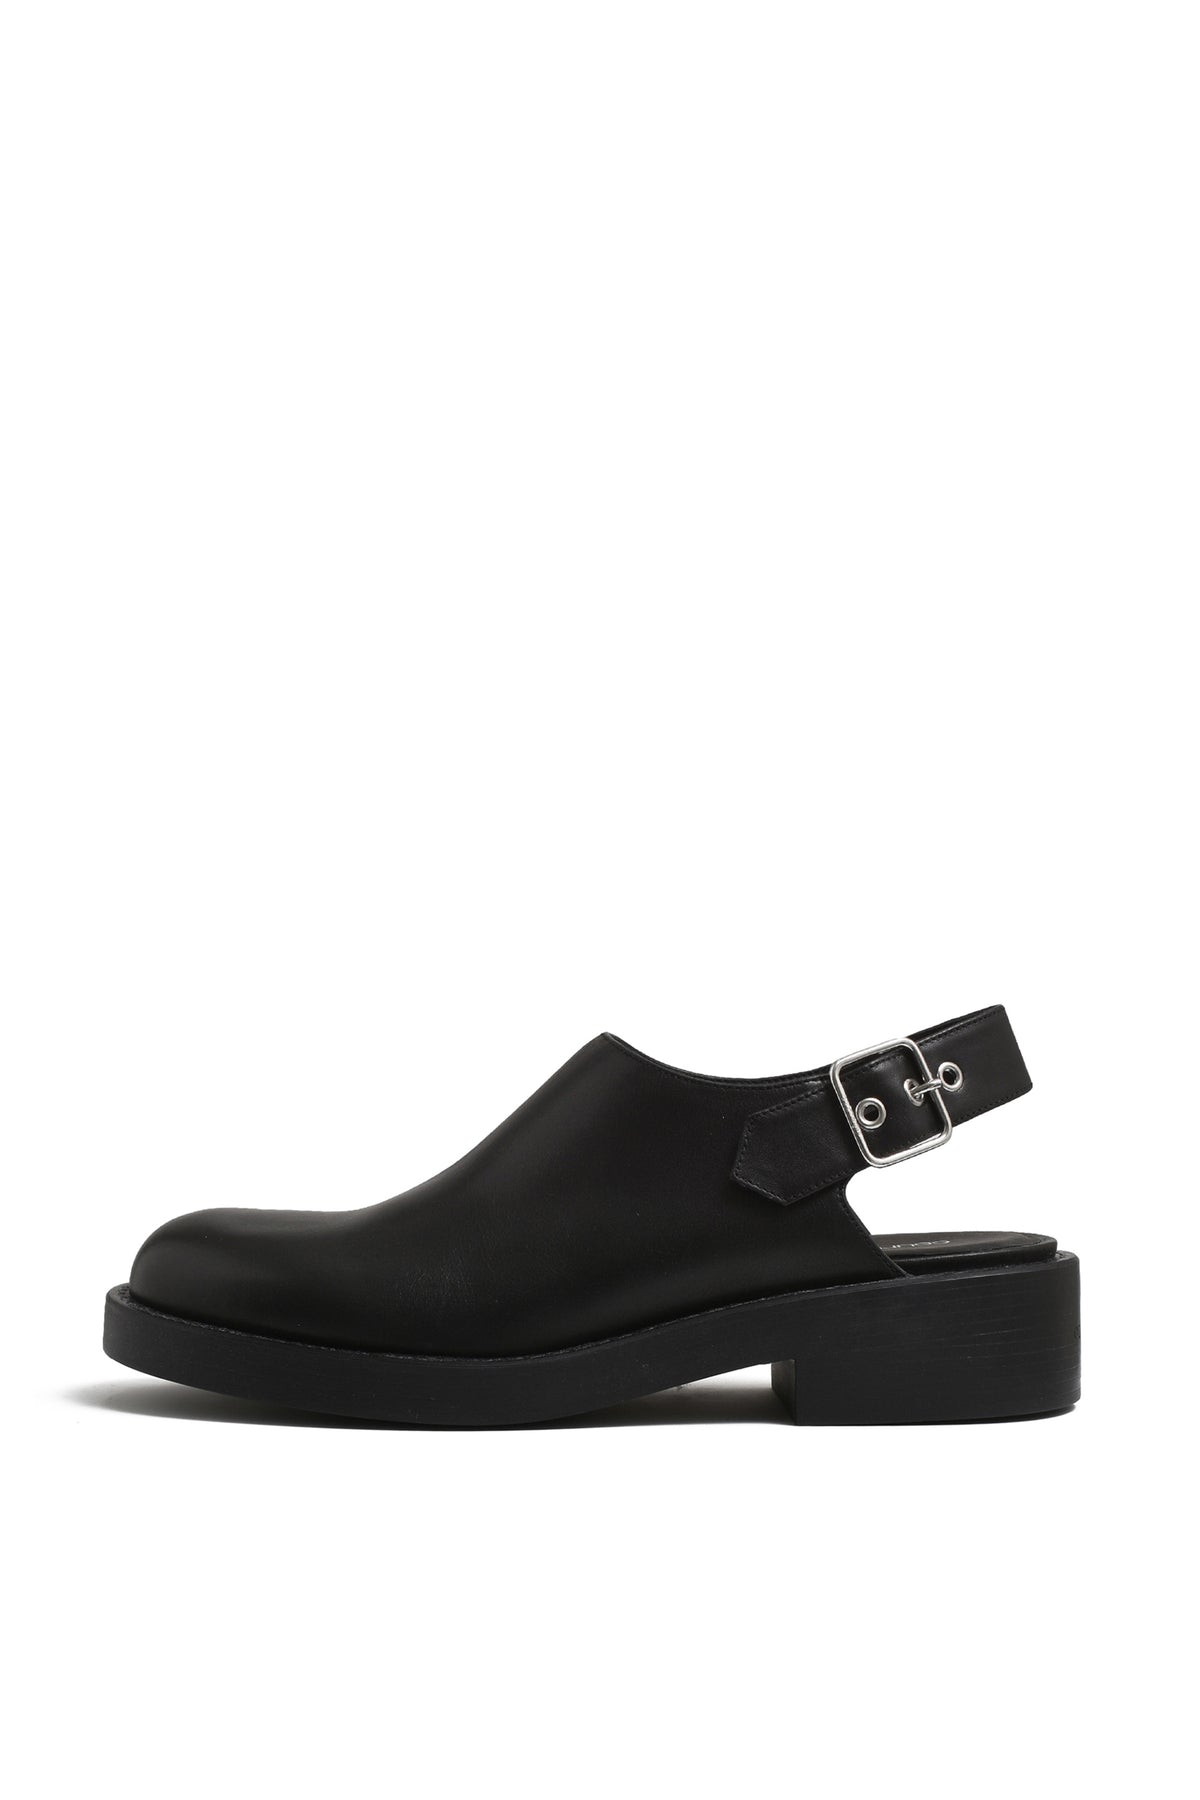 GOGO LEATHER CLOGS / BLK